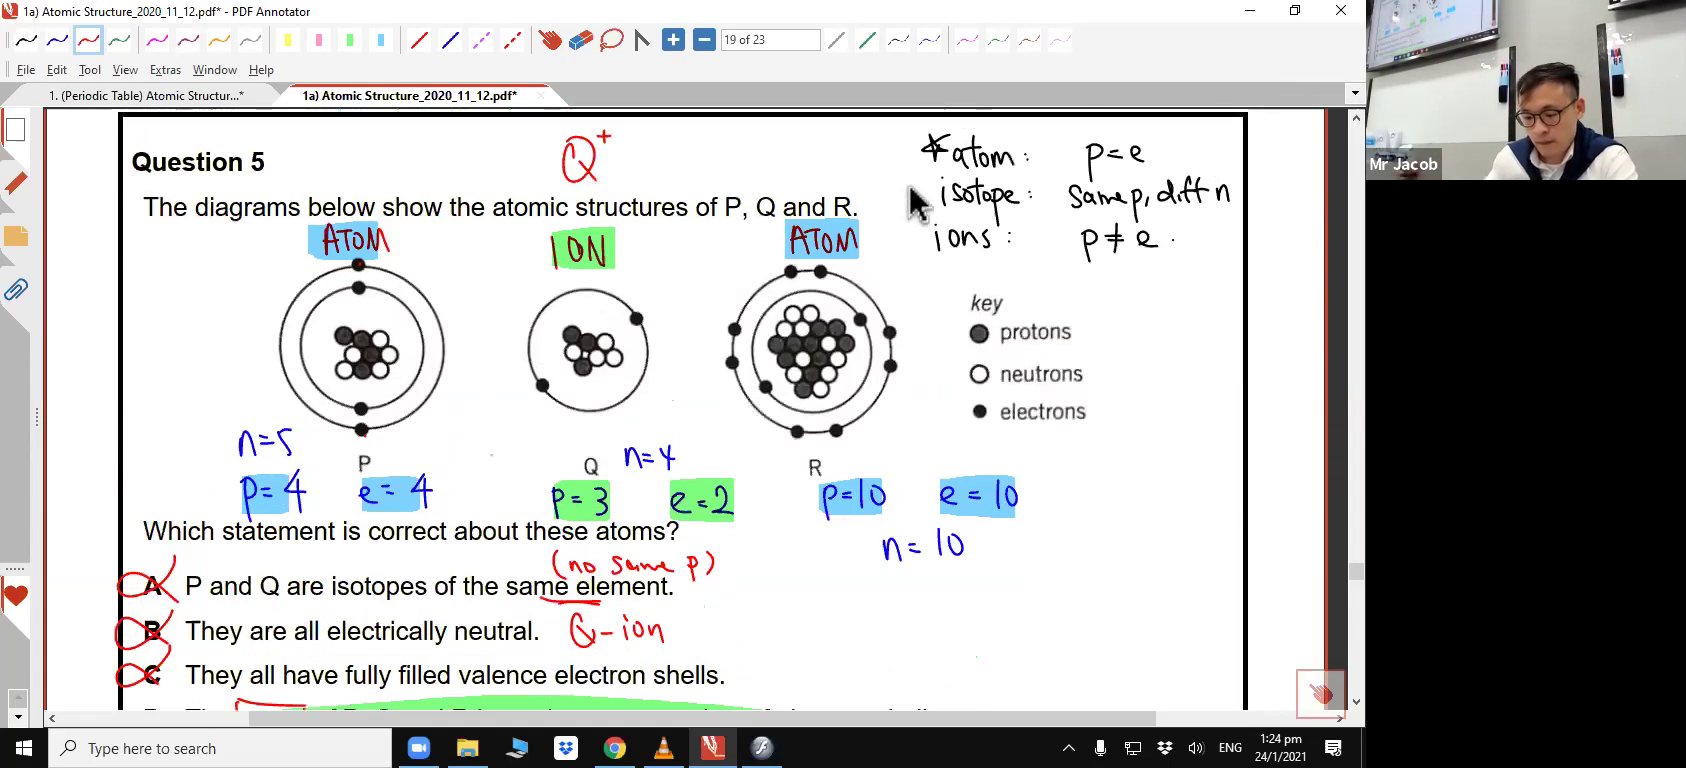 [ATOMIC STRUCTURE] Arrangement of Electrons & Noble Gases